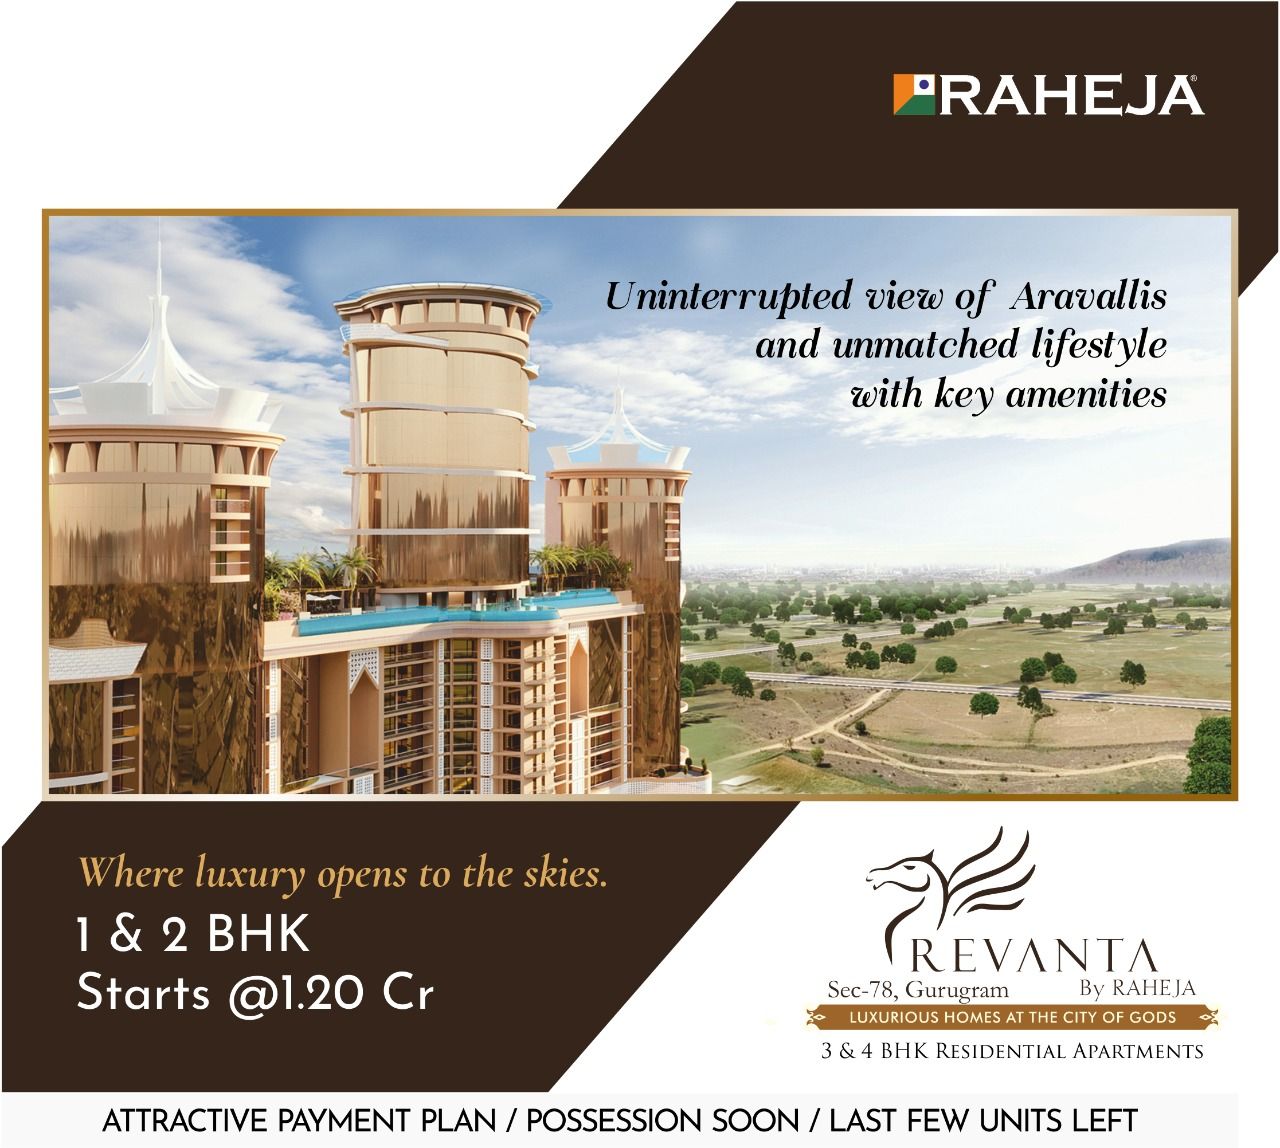 Uninterrupted view of aravallis and unmatched lifestyle with key amenities at Raheja Revanta in Gurgaon